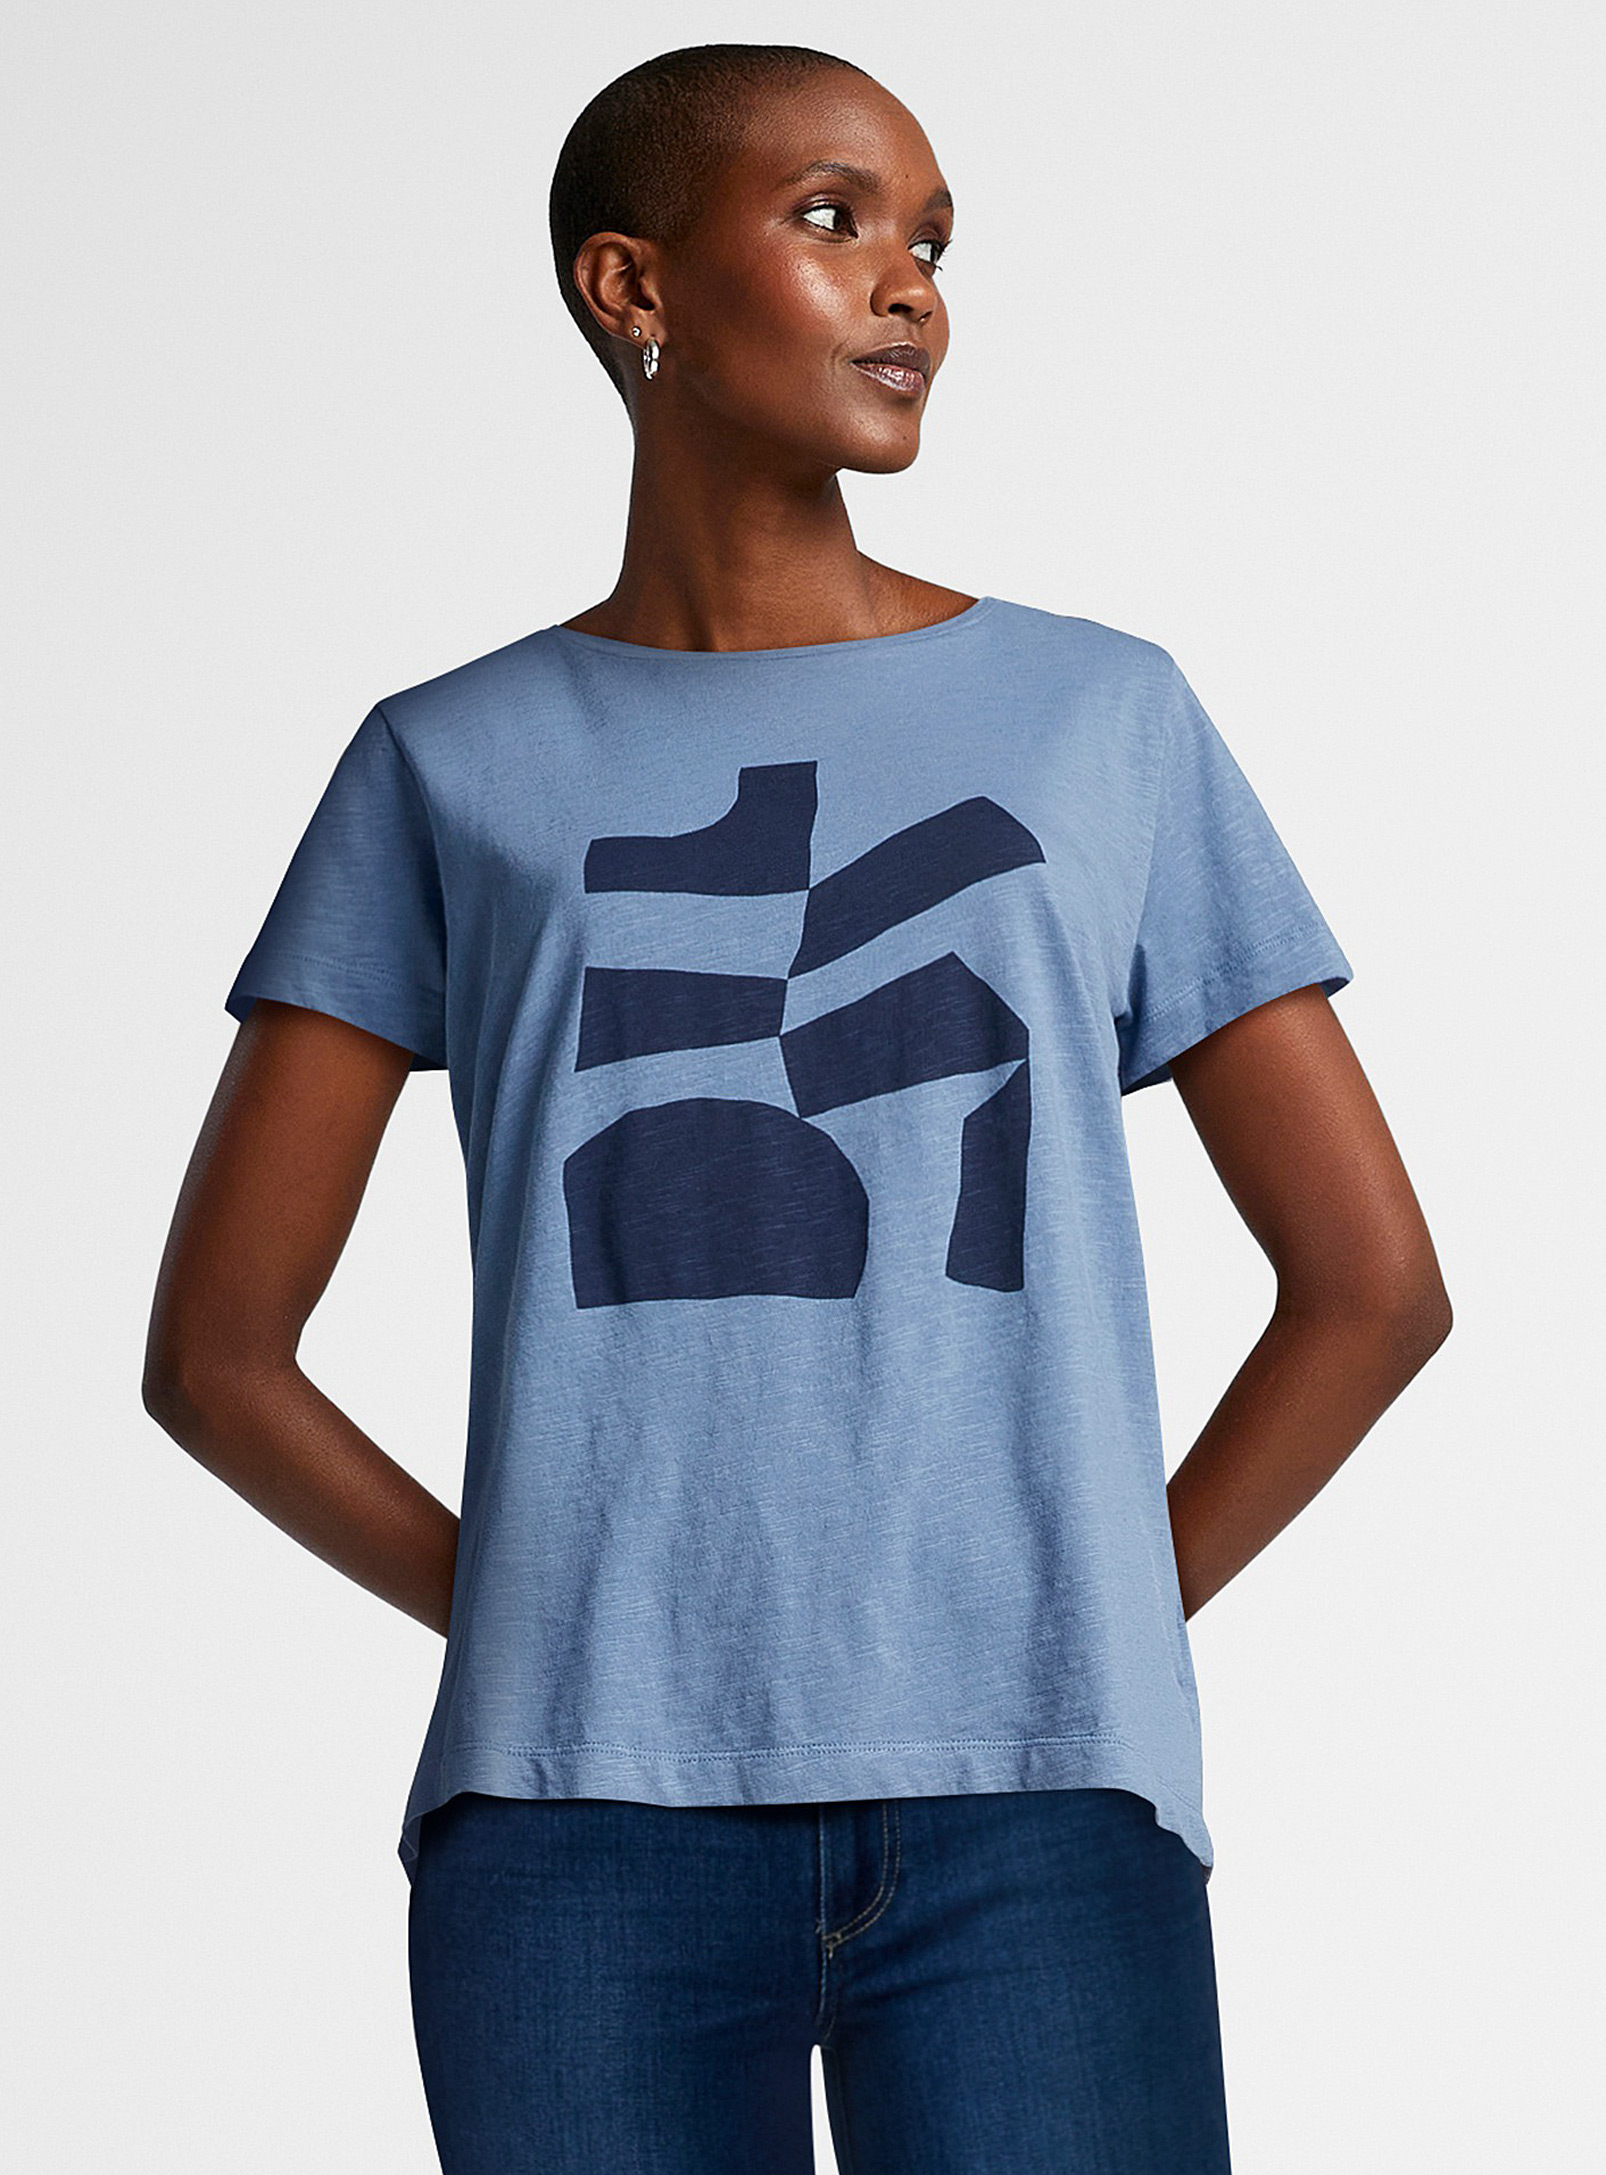 Contemporaine Print Organic Cotton T-shirt In Patterned Blue